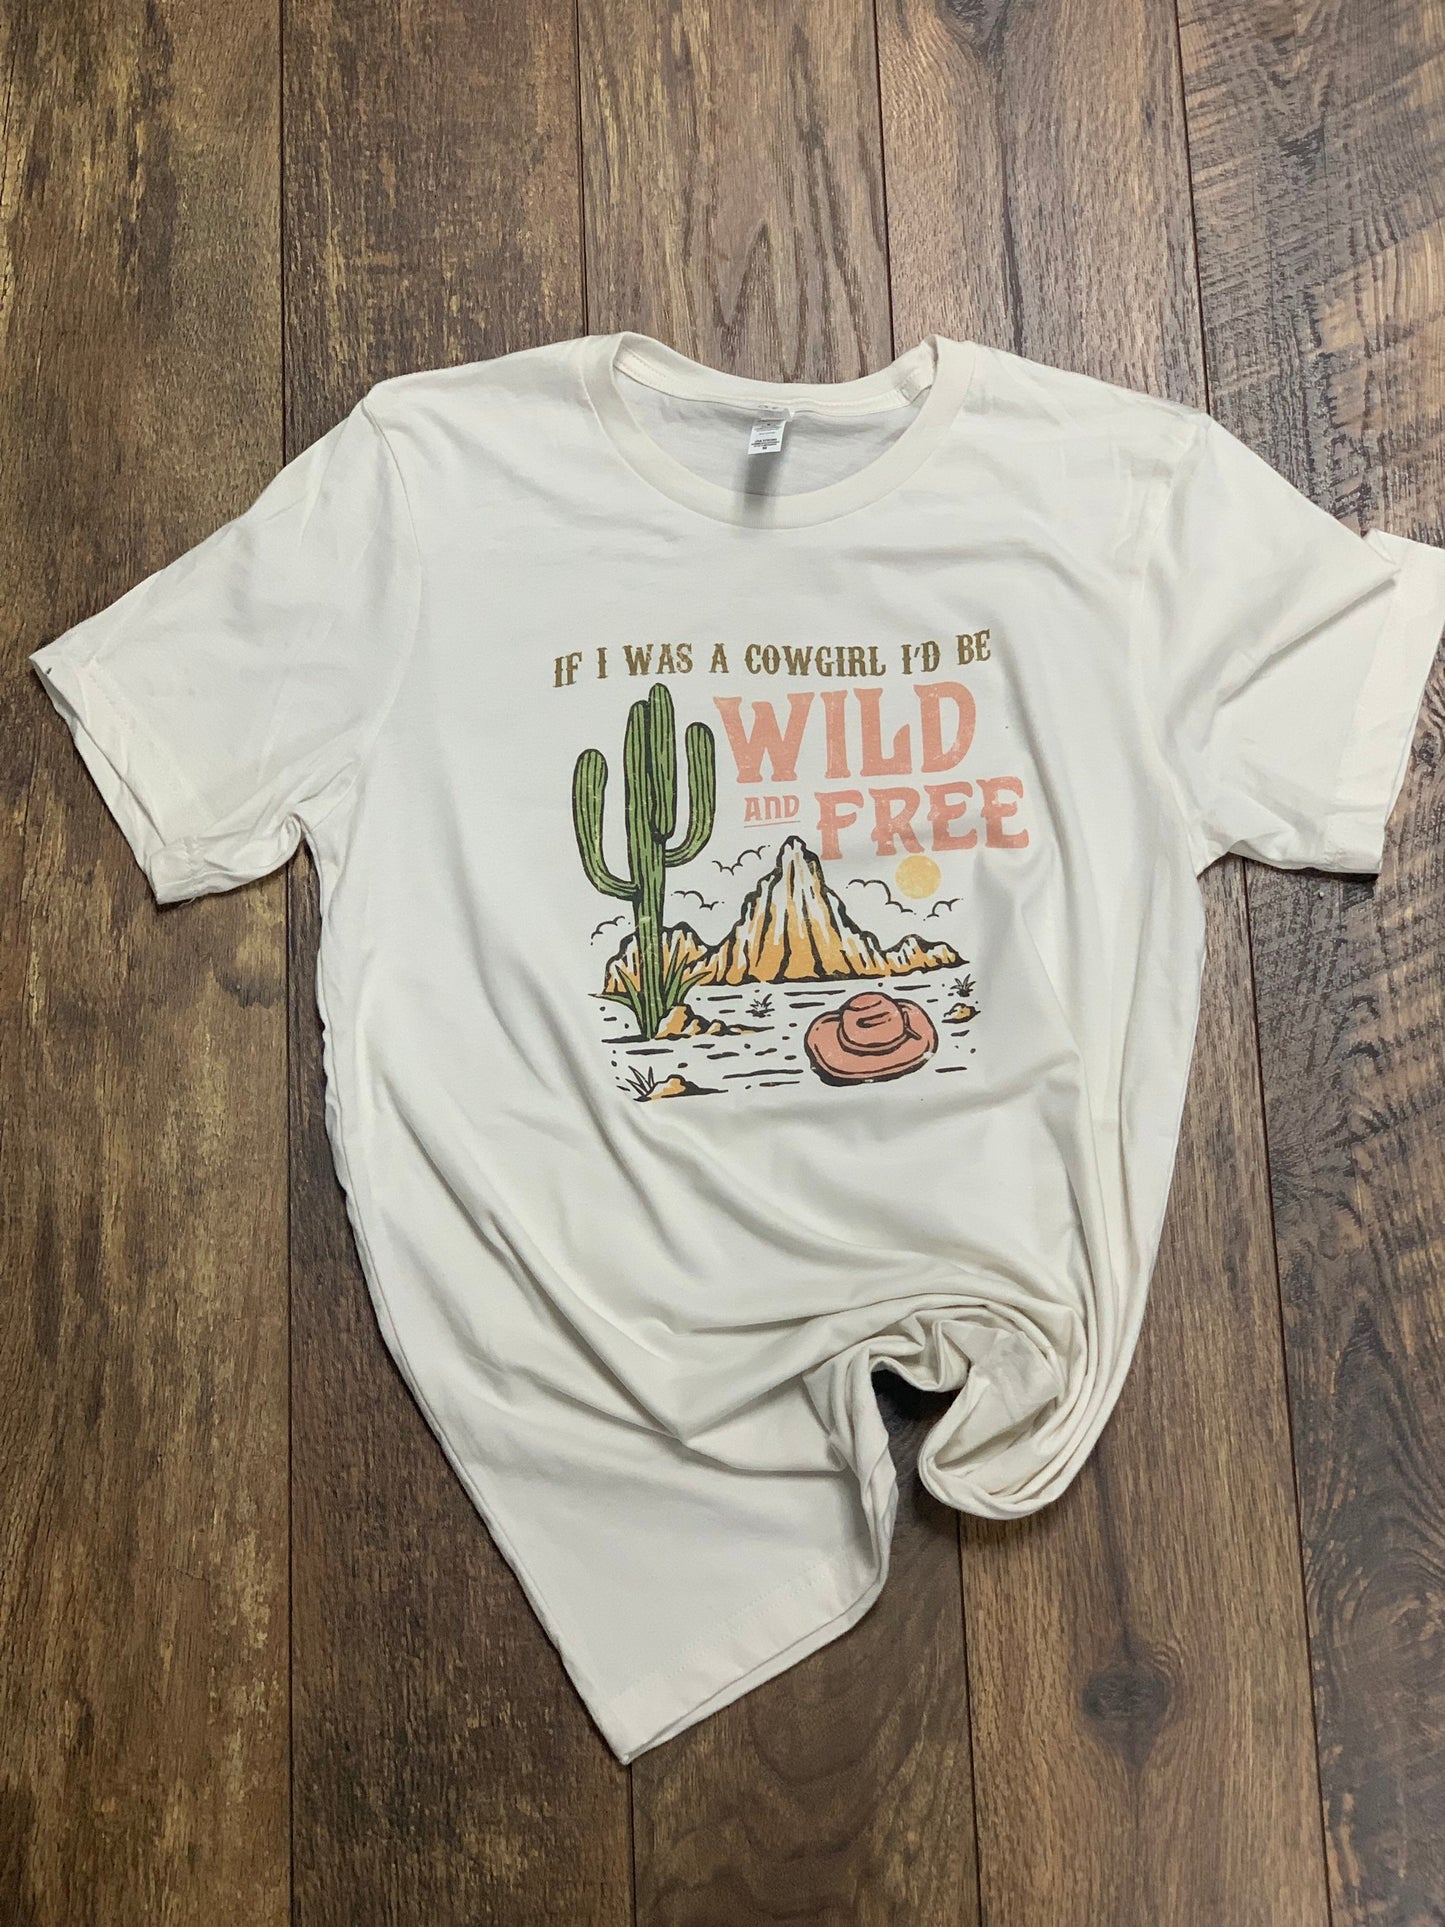 If I was a cowgirl, I’d be wild and free Tee